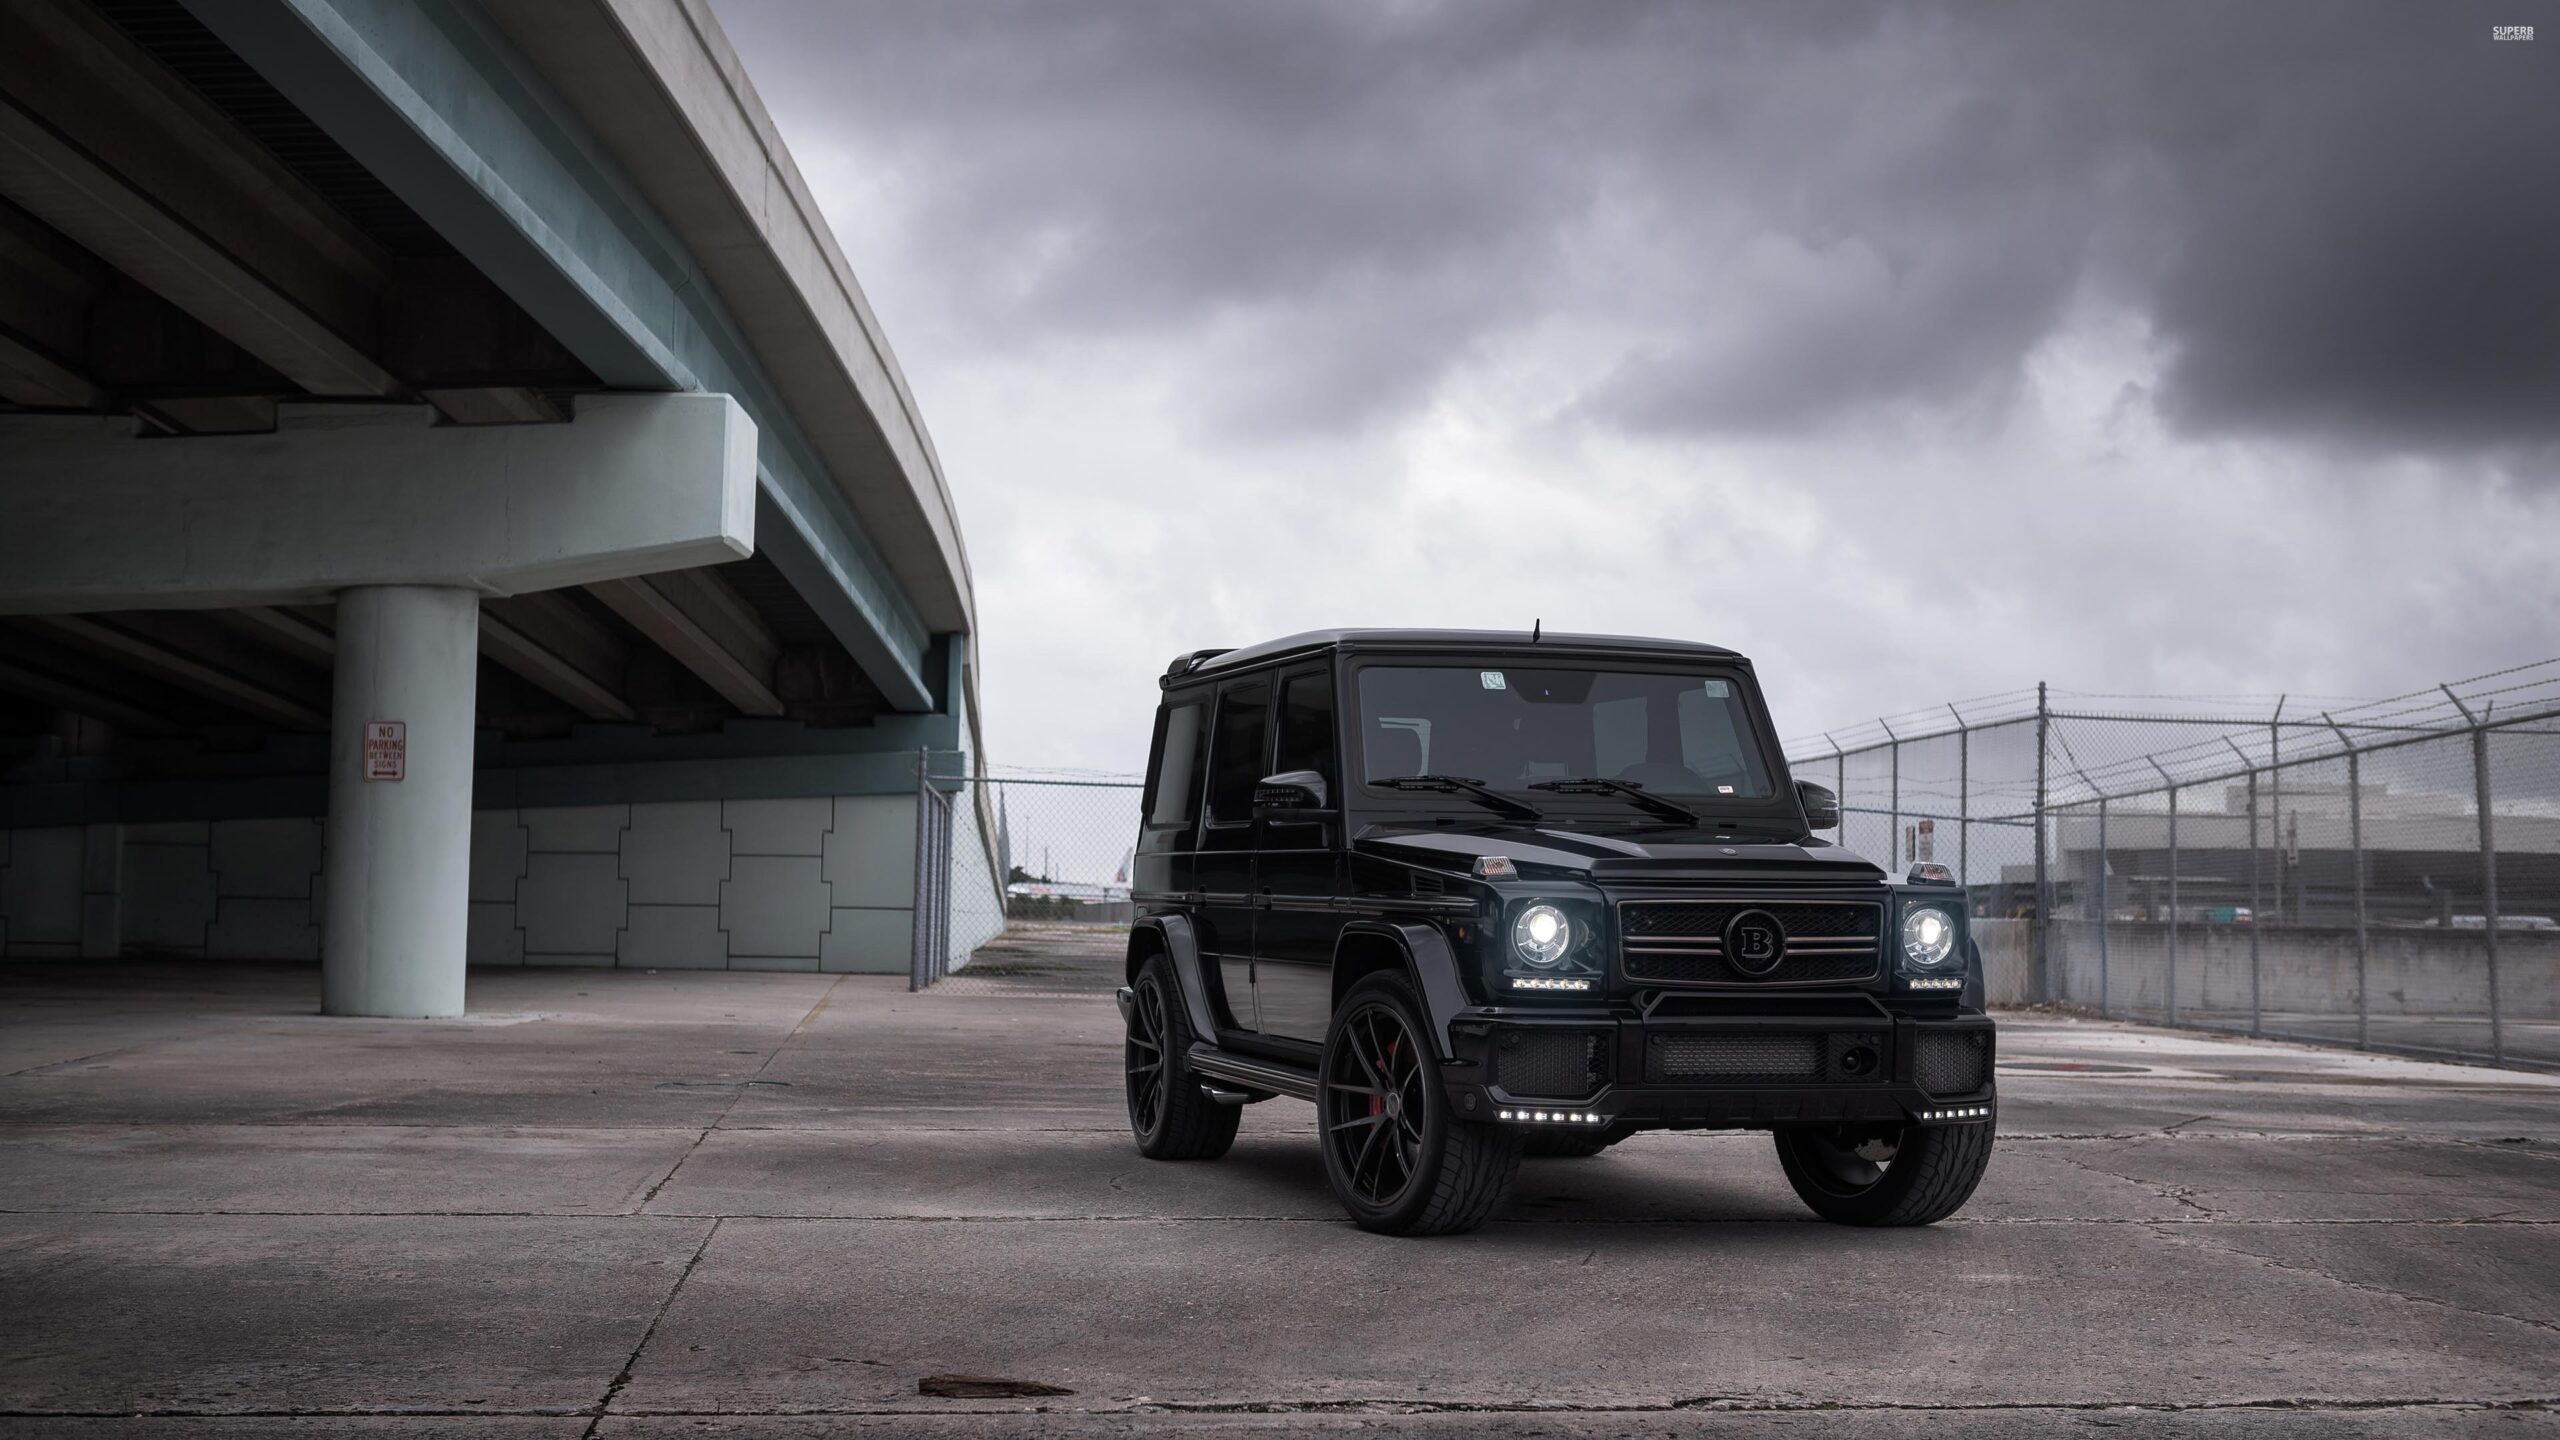 NFL Star Micah Parsons All car collection Mercedes-Benz G-Wagon 2